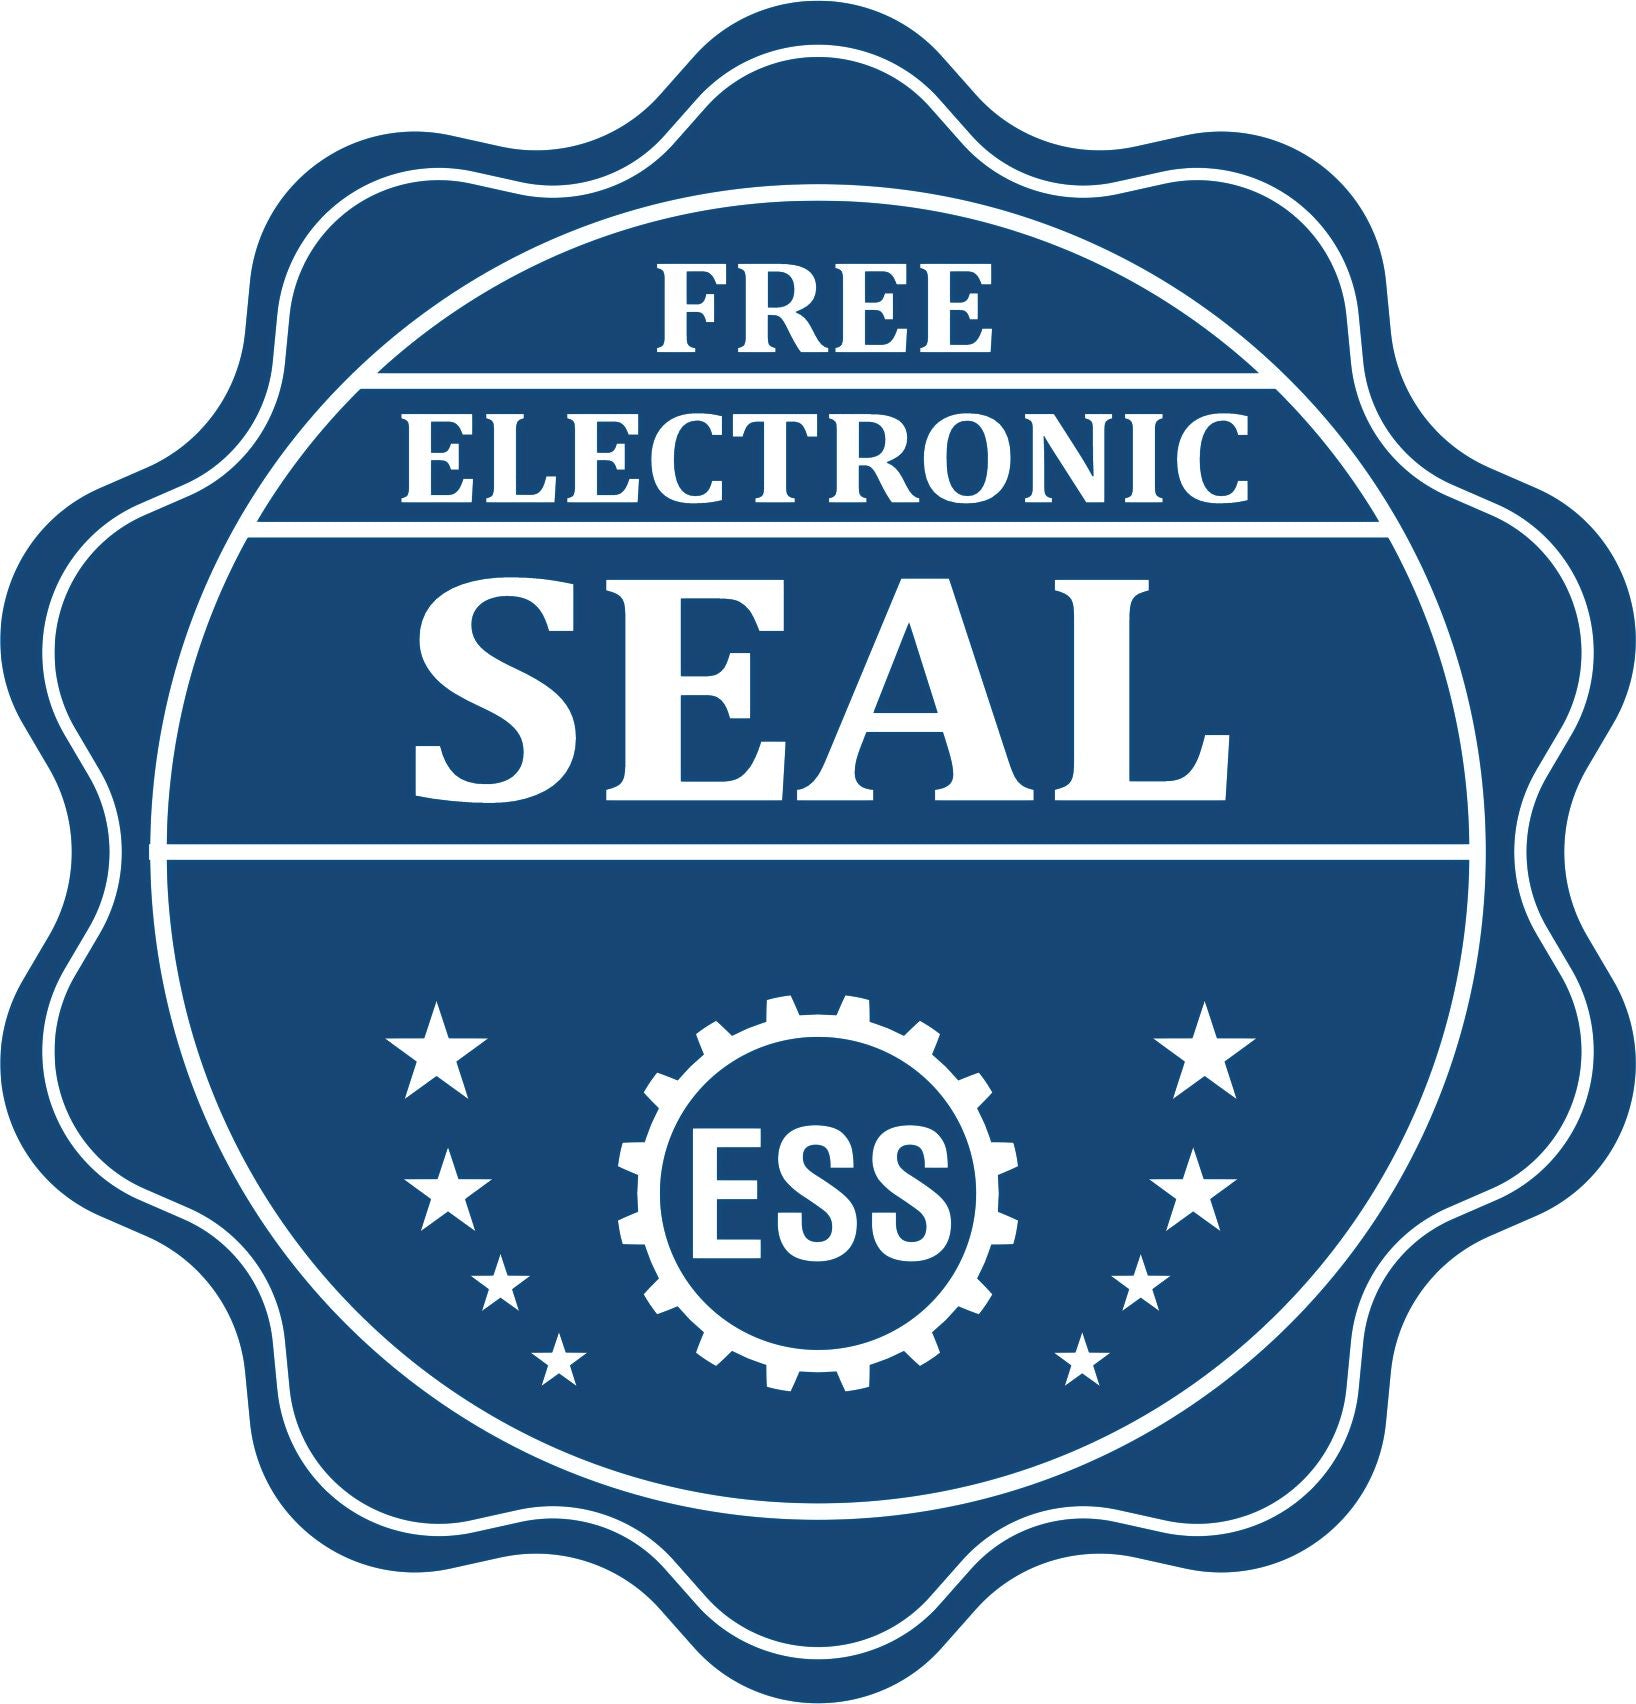 A badge showing a free electronic seal for the Handheld Wyoming Professional Geologist Embosser with stars and the ESS gear on the emblem.